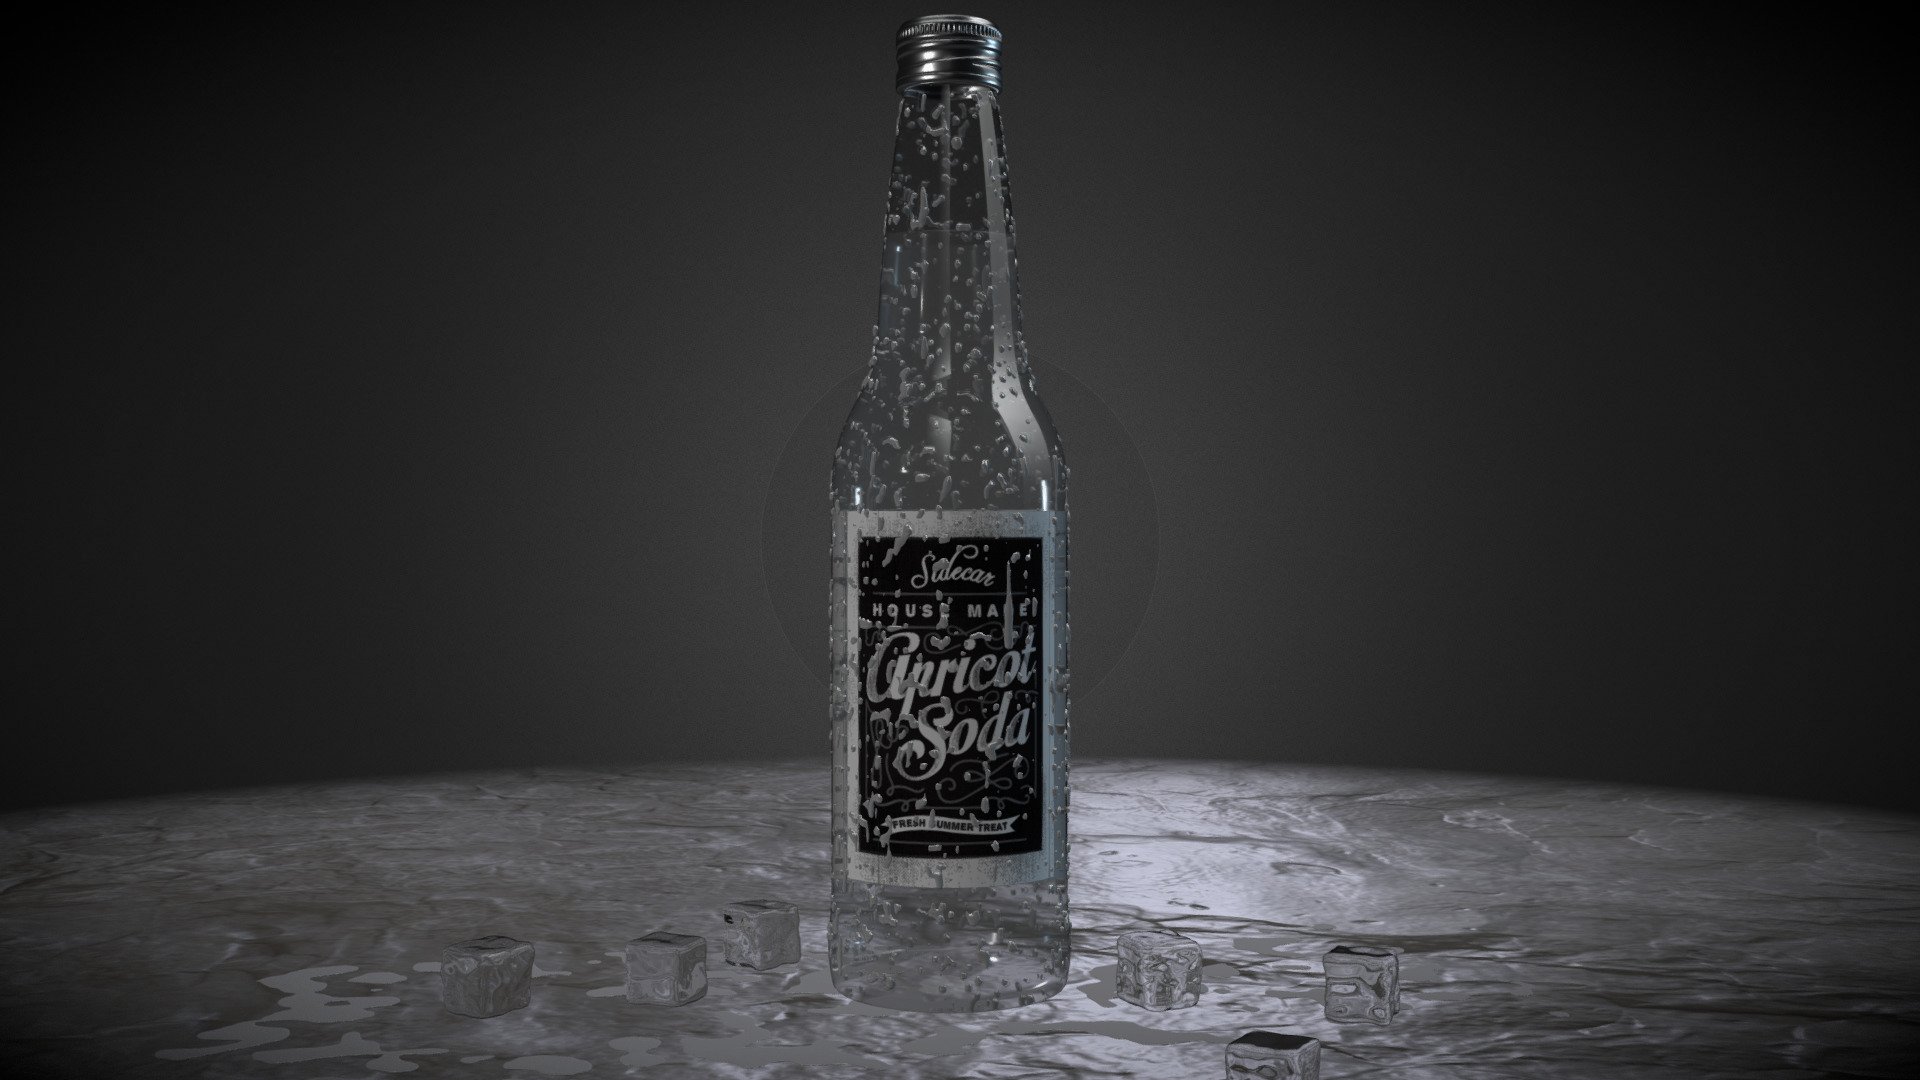 Scene of realistic 12 fl oz (355 ml) soda bottle with vintage label, drops of water, ice cubes and puddles. 

Label has UV texture coordinates and UV maps: diffuse and opacity (4096x4096 px). Originally modeled and rendered in Blender Cycles 2.78. 

BONUS Original scene included (.blend) and has a bottle, cap, label, water drops, ice cubes, puddles, lights, floor and background surfaces with shaders, textures and lights. Lights and shaders are set up, so the scene is completely ready to render with Cycles Blender. The geometry is subdivided to get the result that you can see on the renders 3d model